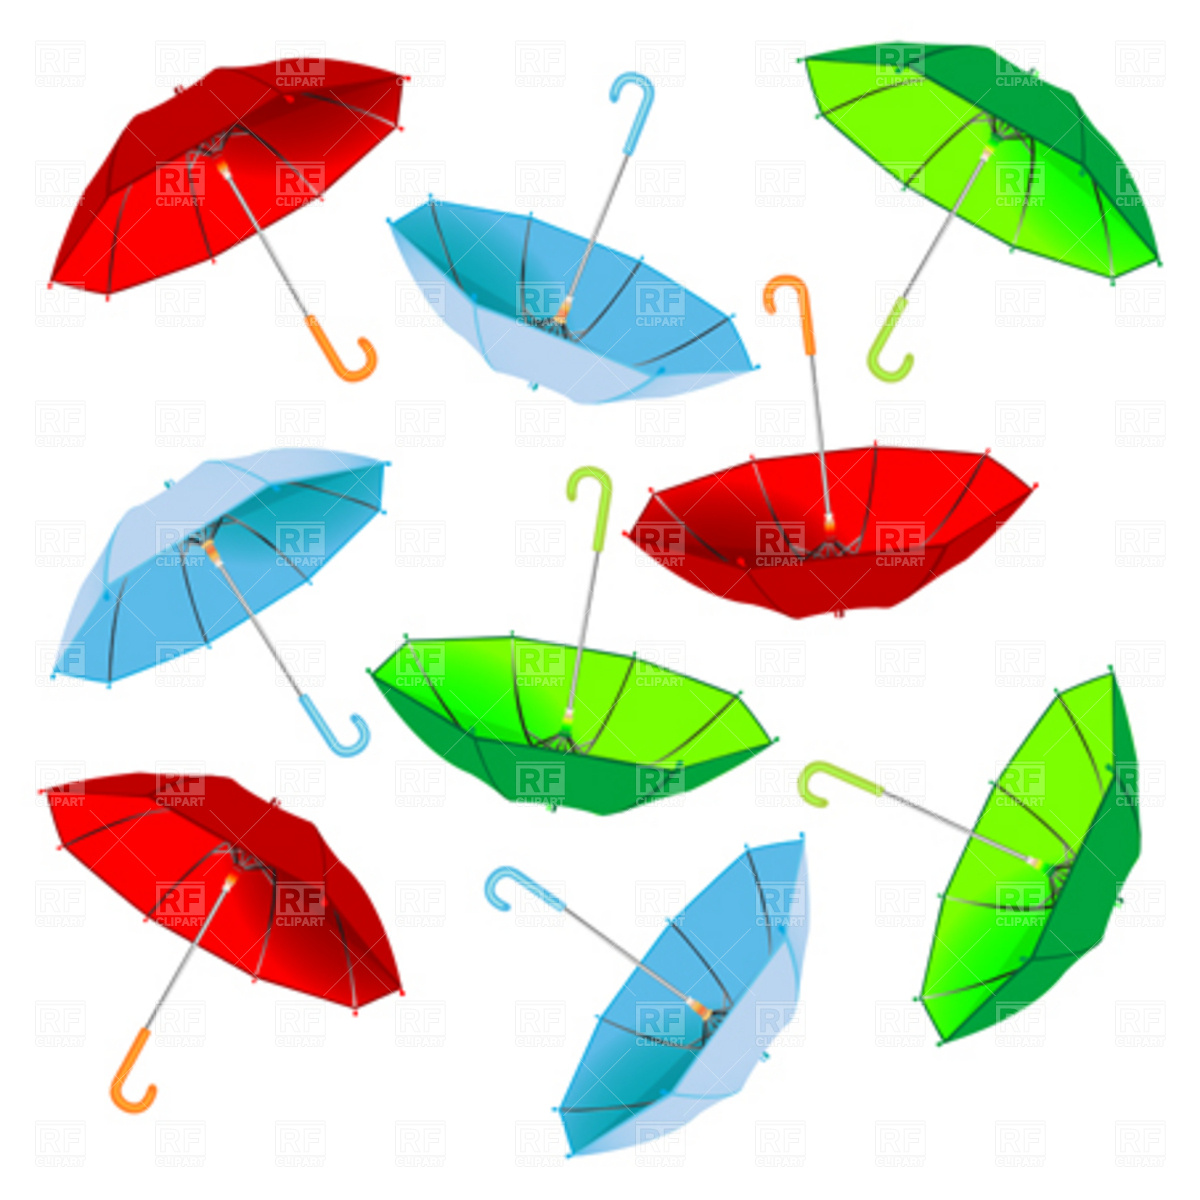 Catalog   Objects   Umbrella Download Royalty Free Vector Clipart